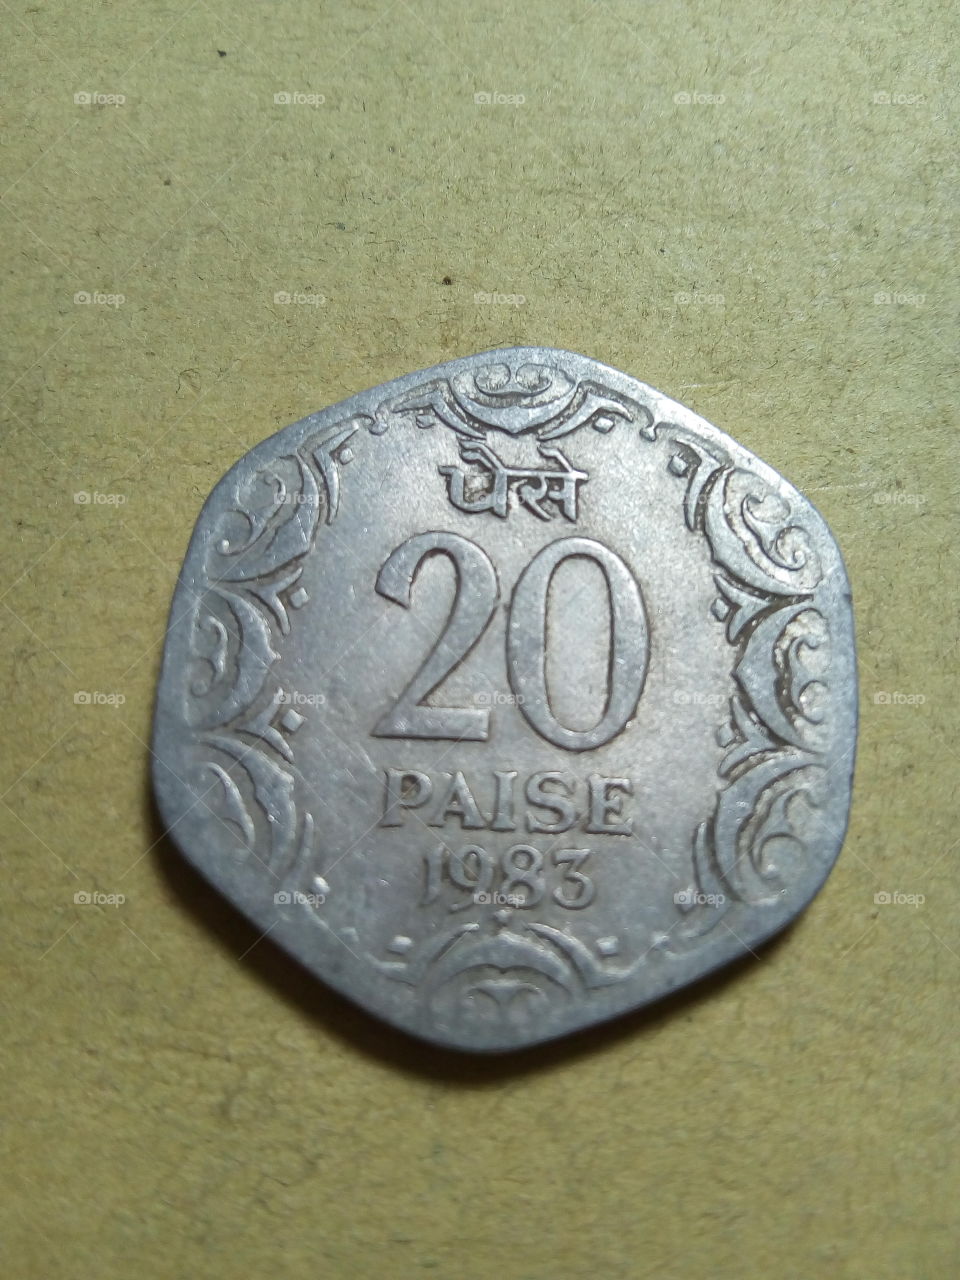 A coin of twenty paise- 1/5 share of Indian Rupee issued by Government of India in 1983.